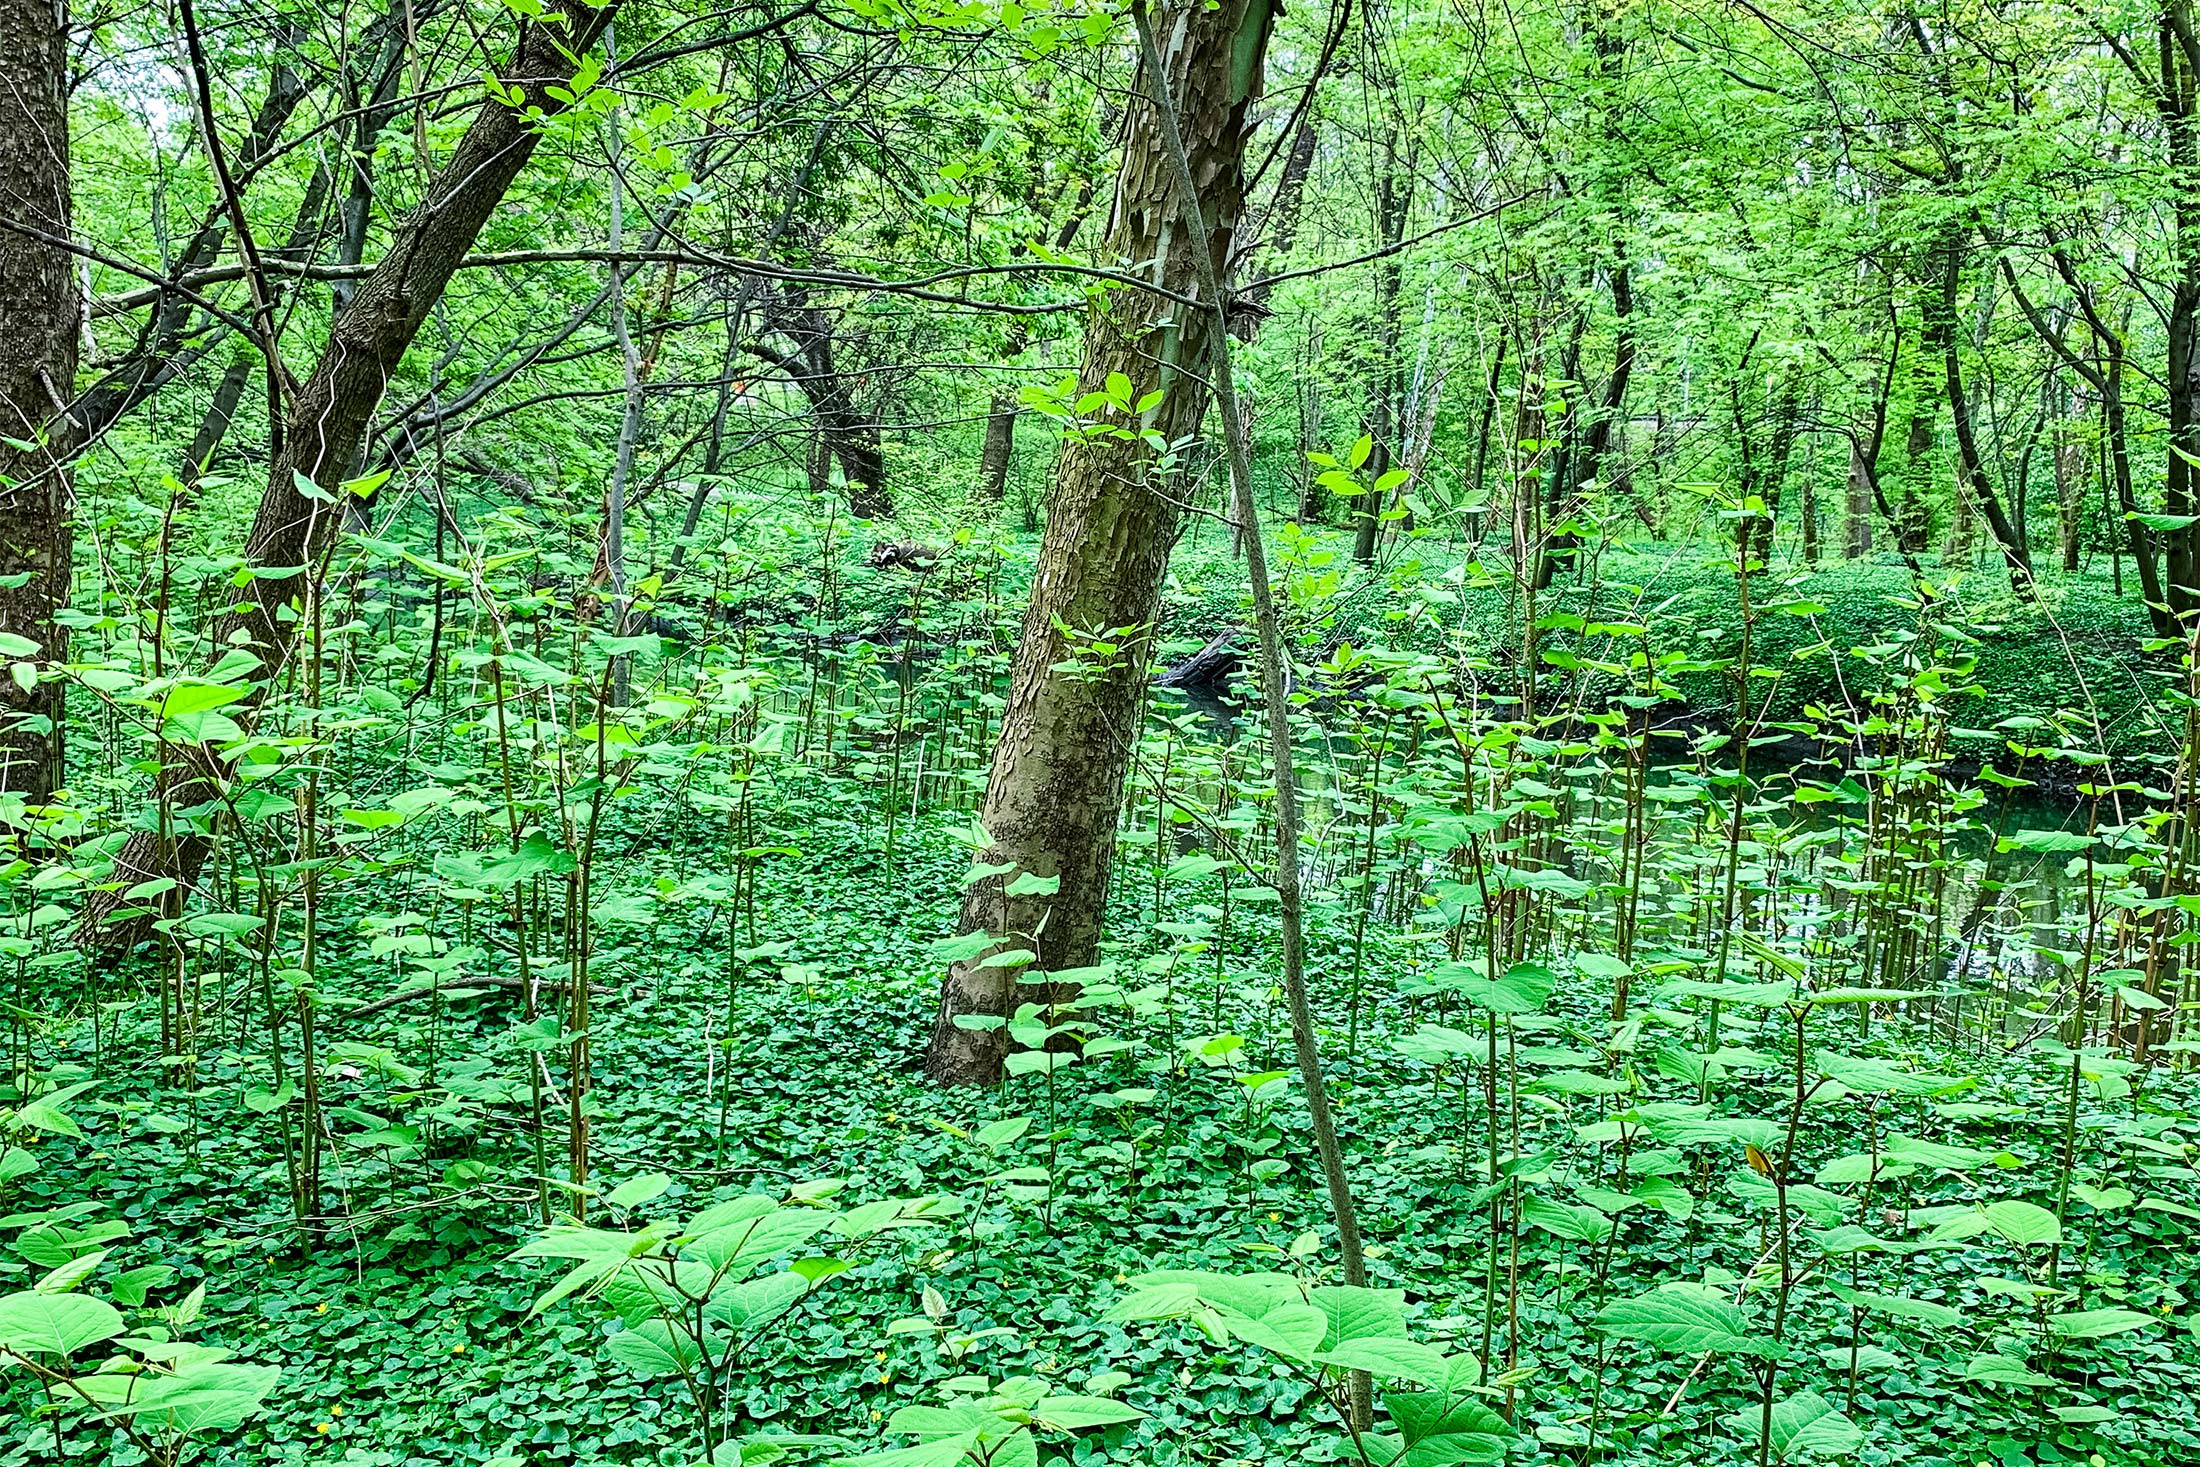 Knotweed rises on the banks of the Bronx River in New York City, where more than 200 acres of parkland is covered by knotweed.